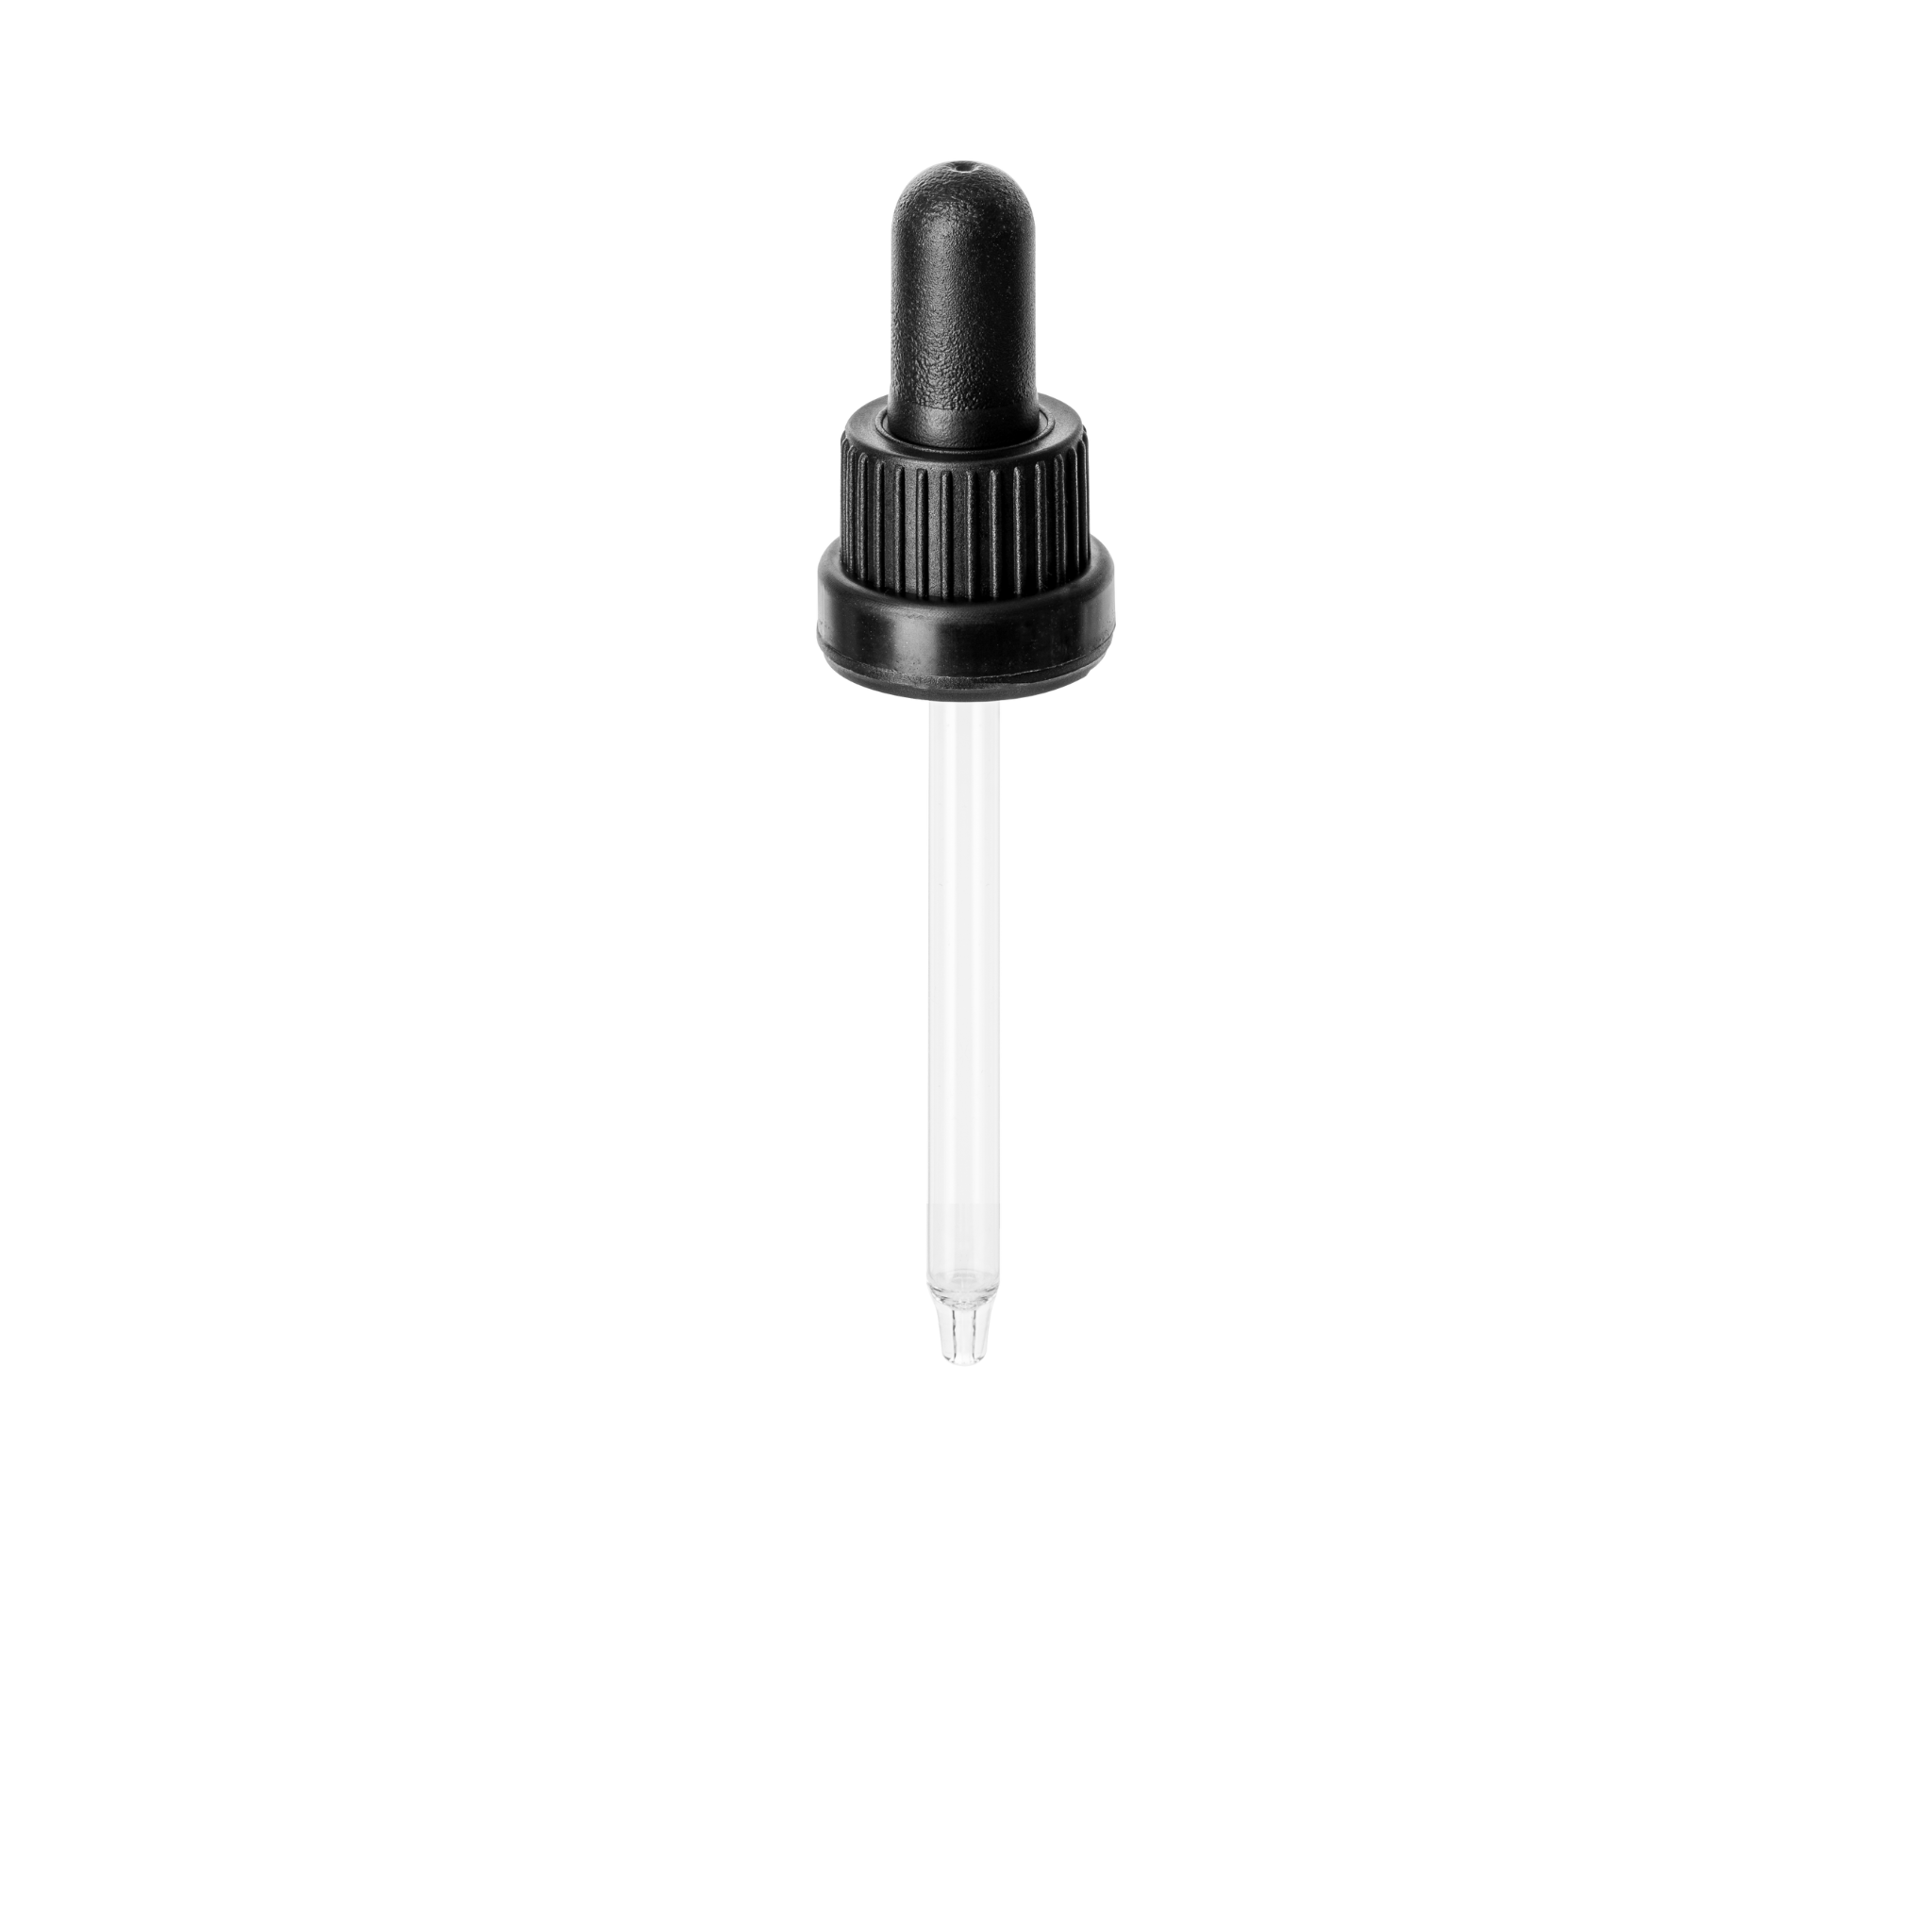 Pipette tamper evident DIN18, III, black, ribbed, bulb NBR, dose 1.0ml, conical tip (Orion 30)